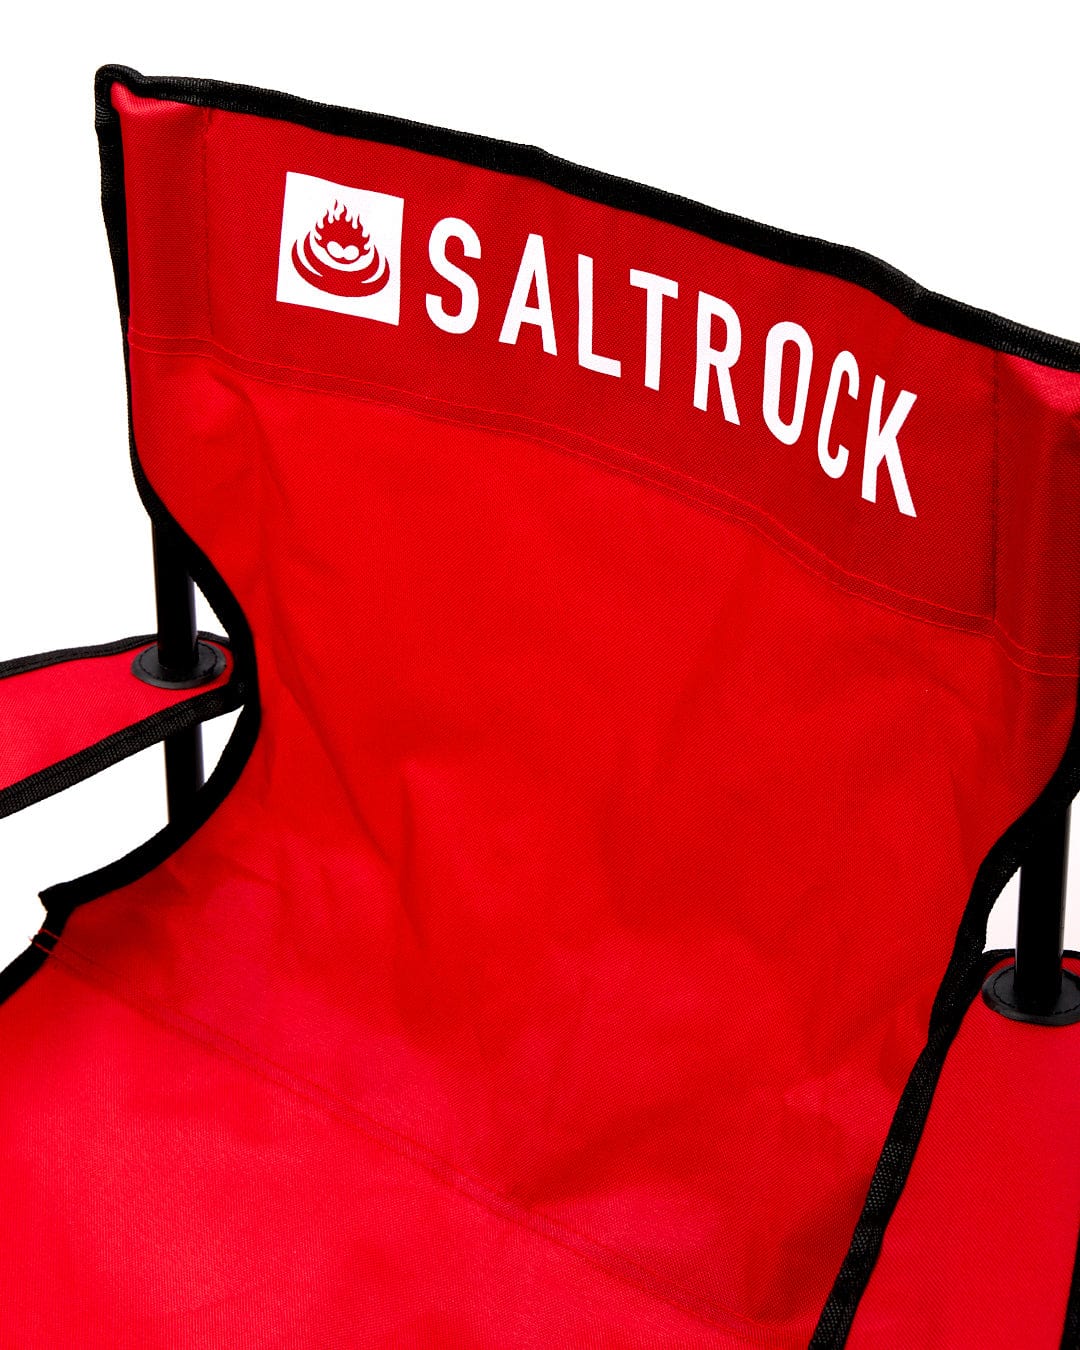 A lightweight, red Sanur - Foldable Beach Chair with the Saltrock logo on it and a mesh cup holder.